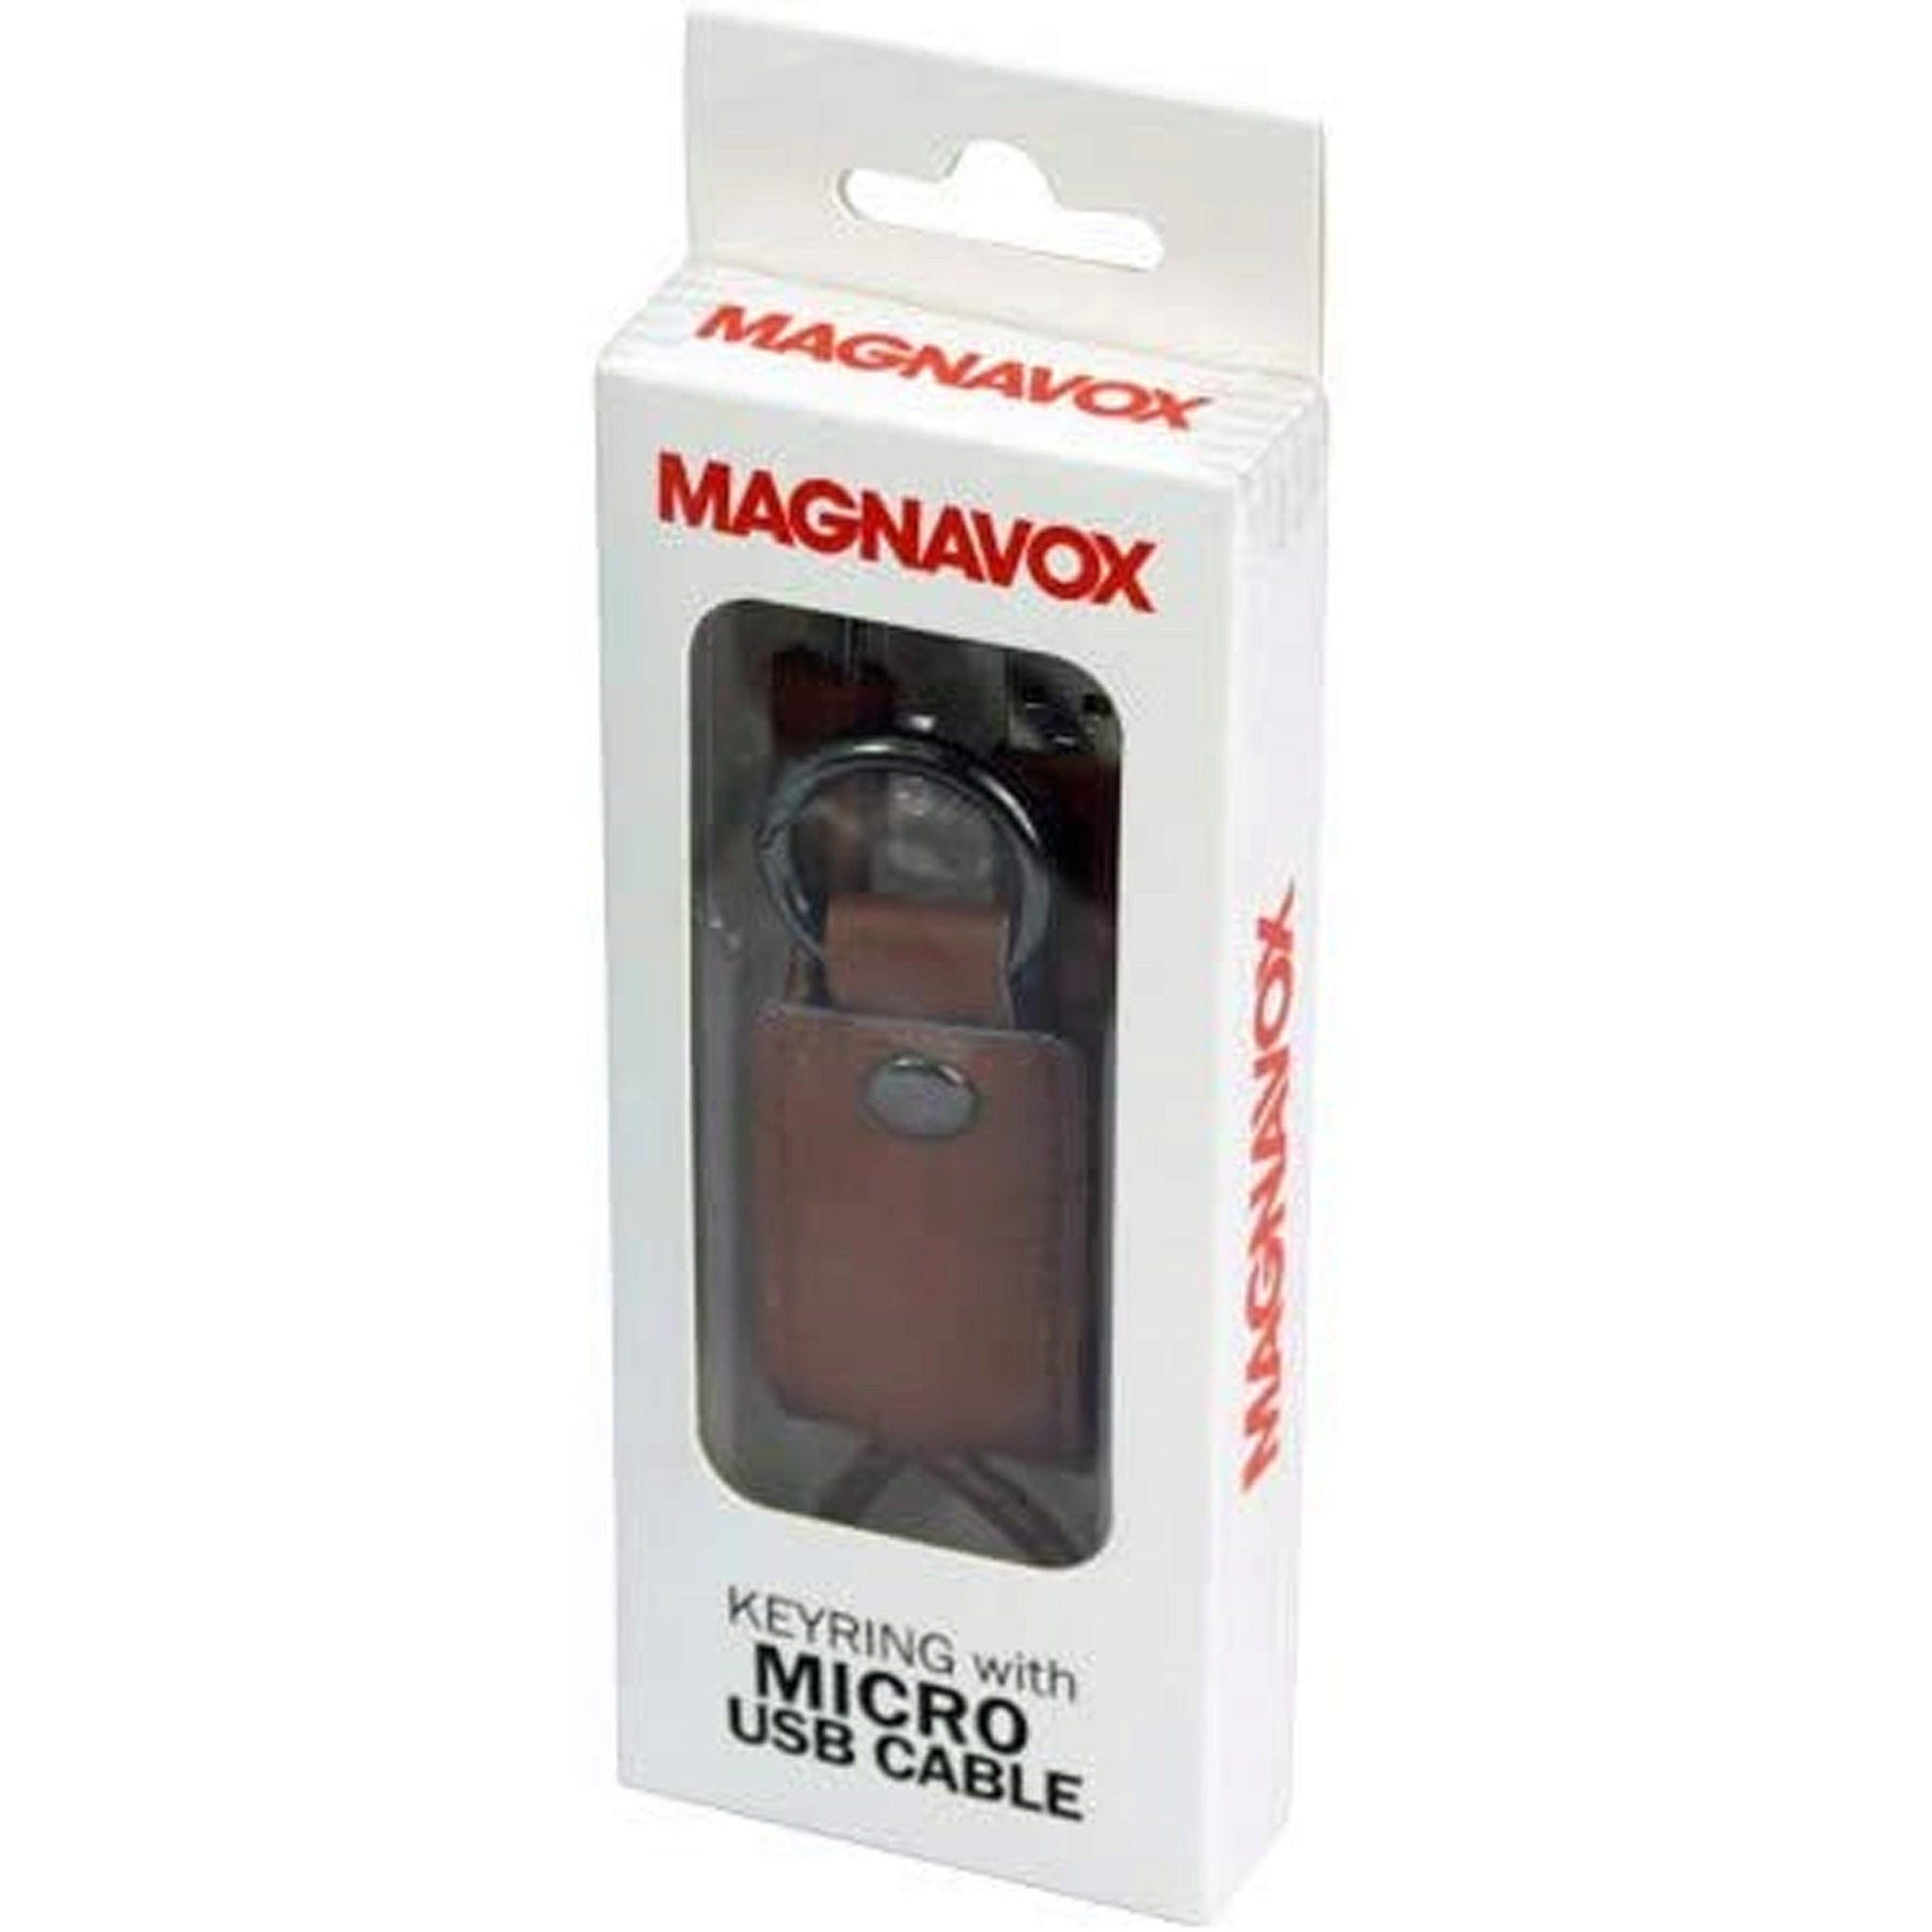 magnavox keyring with micro usb charging cable - -  -- 20 per case